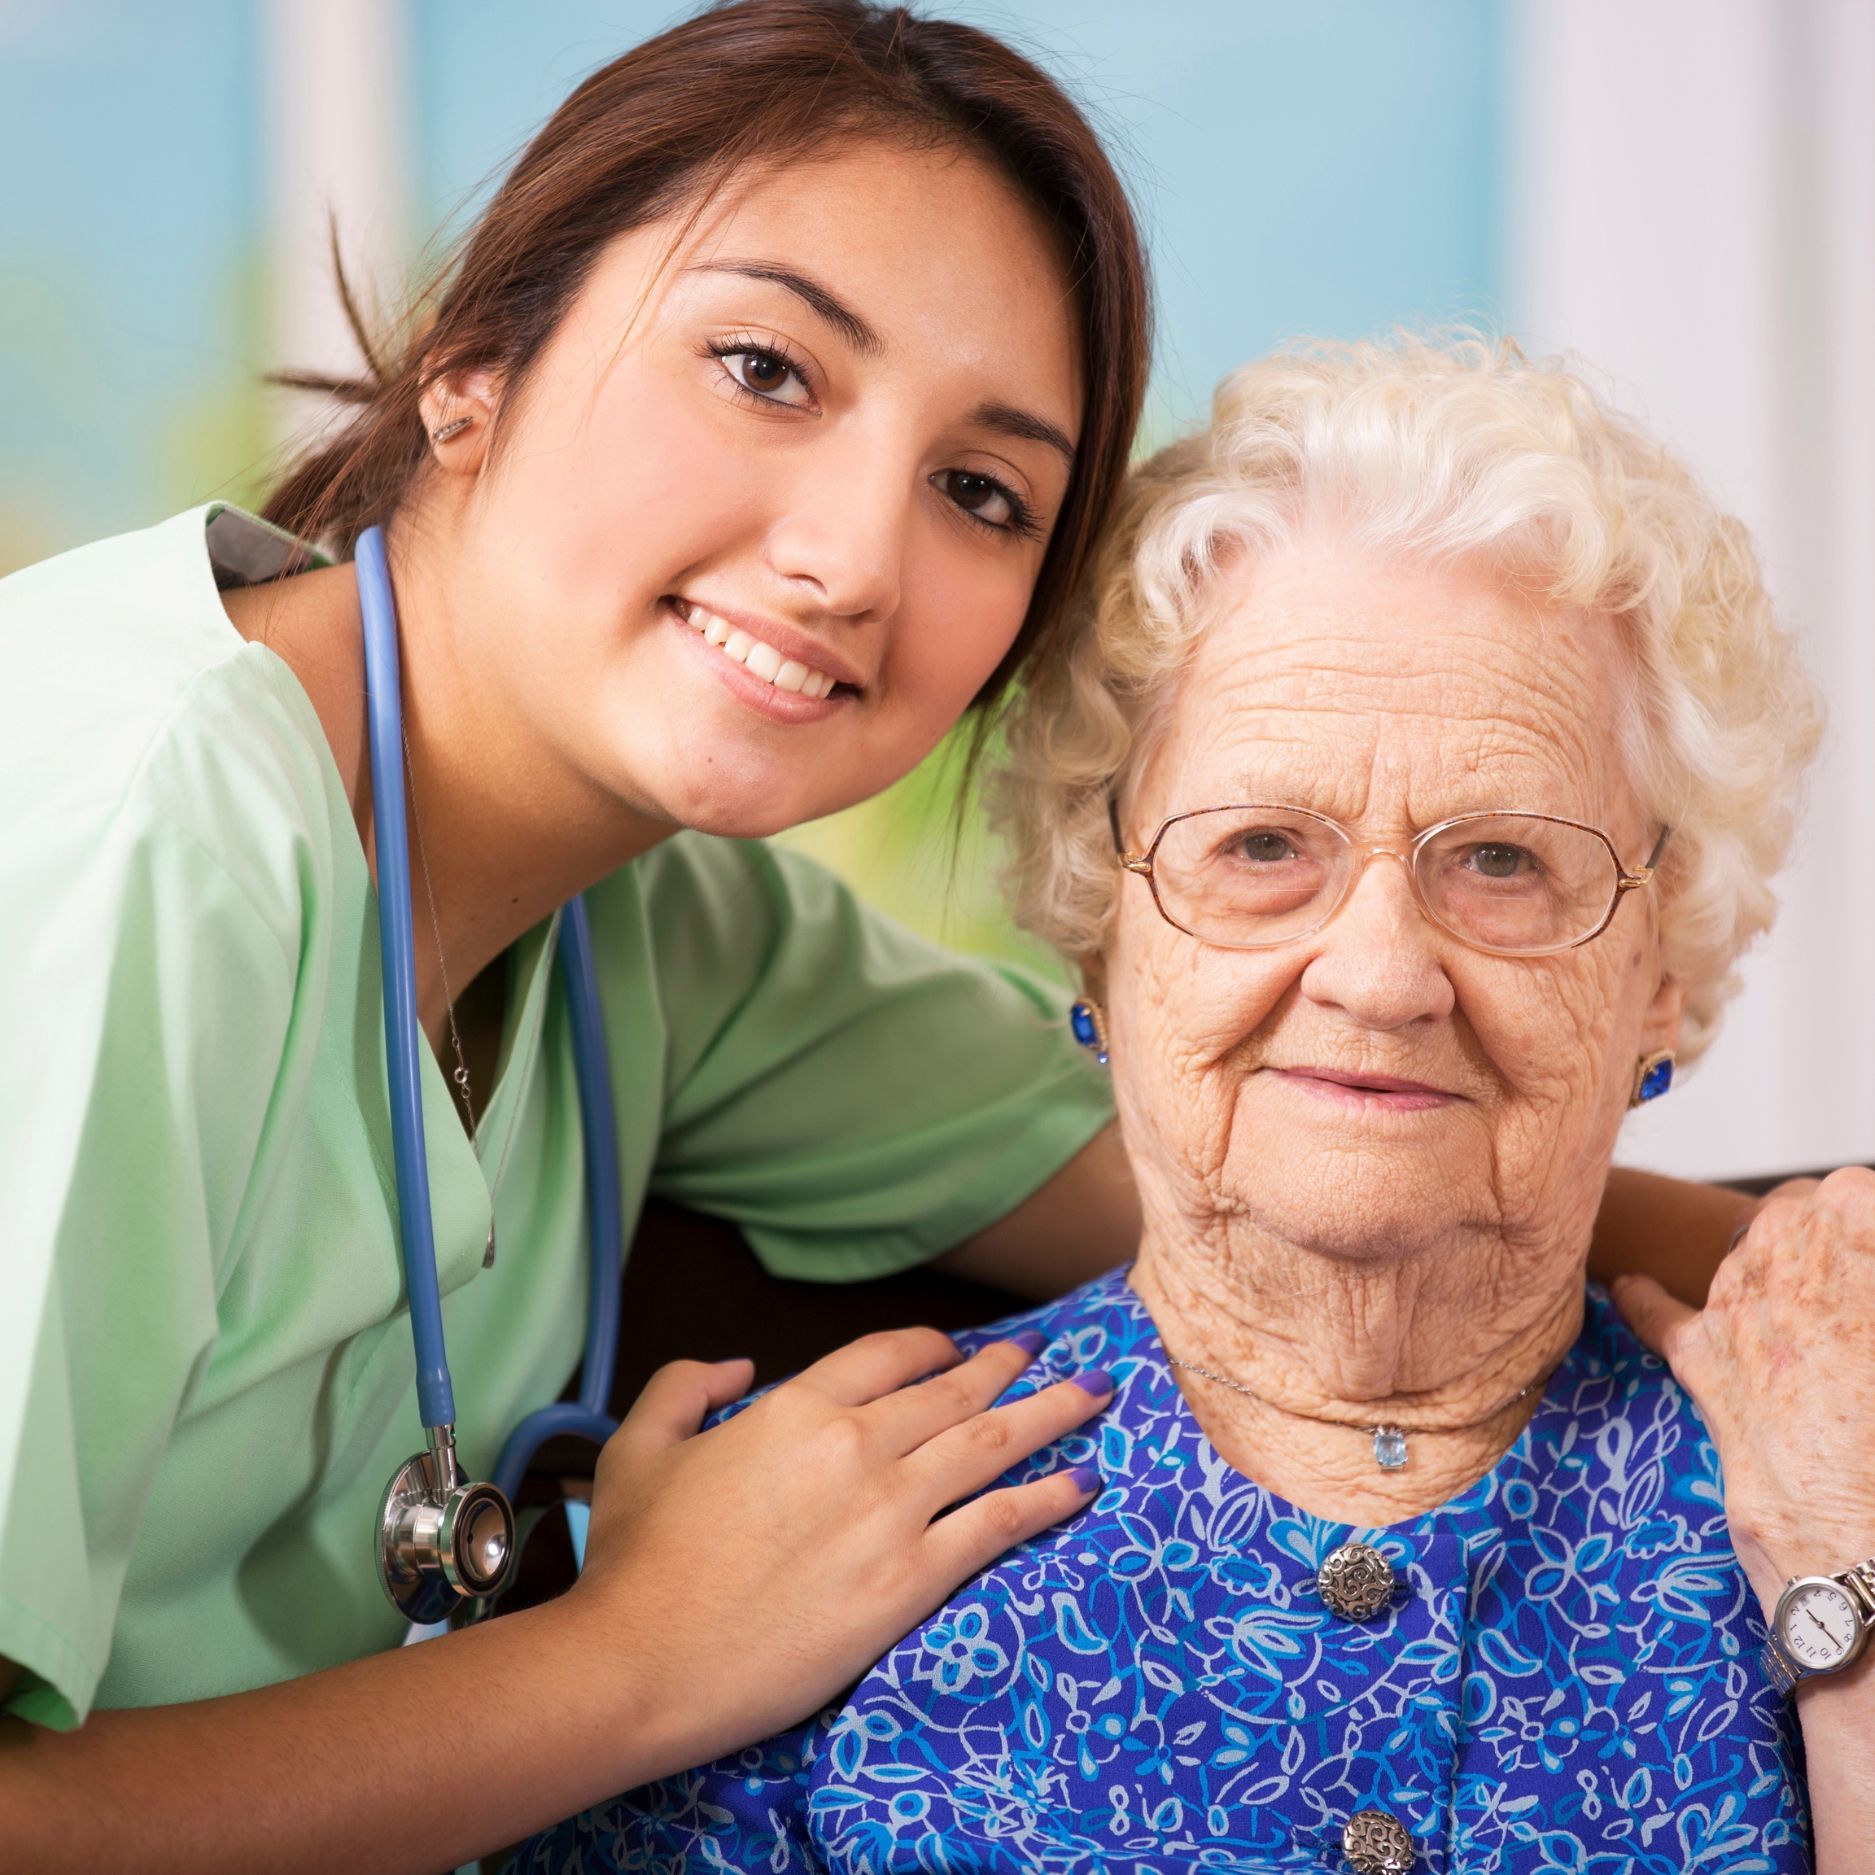 A nurse is posing for a picture with an elderly woman